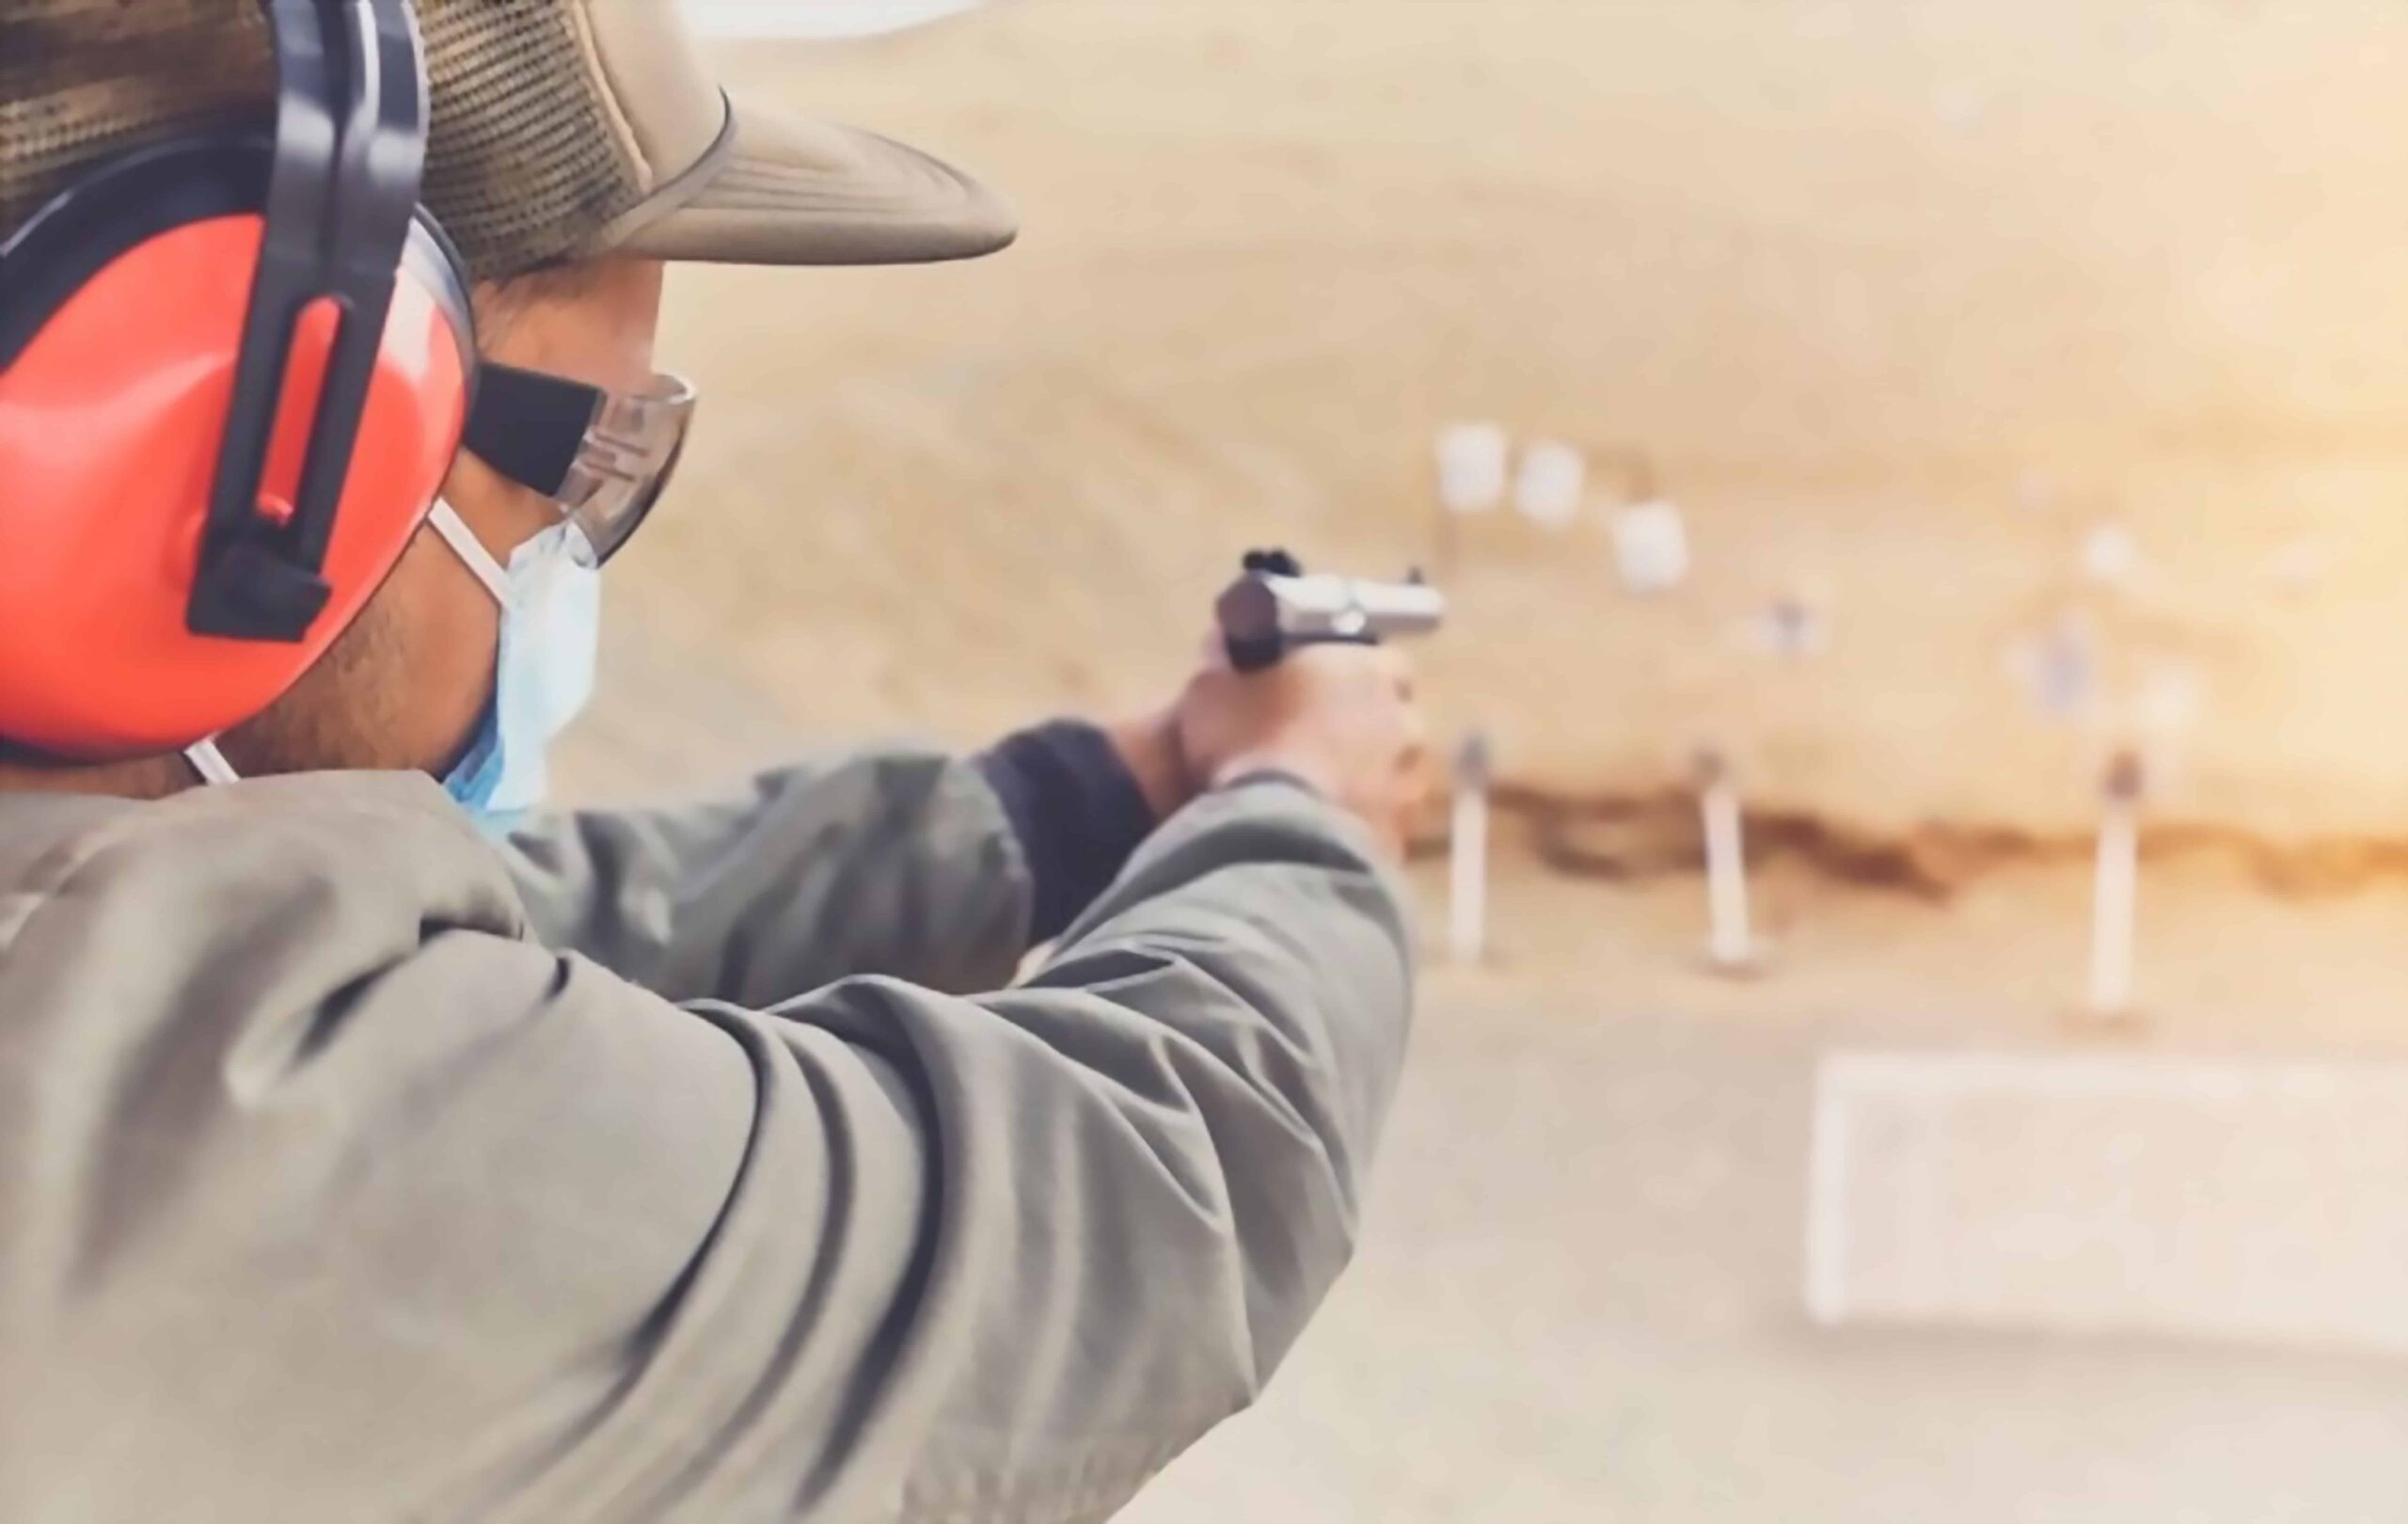 Texas LTC Training - Texas LTC Range Qualification - Concealed Handgun License Texas - Convenient and affordable online CHL training and LTC training